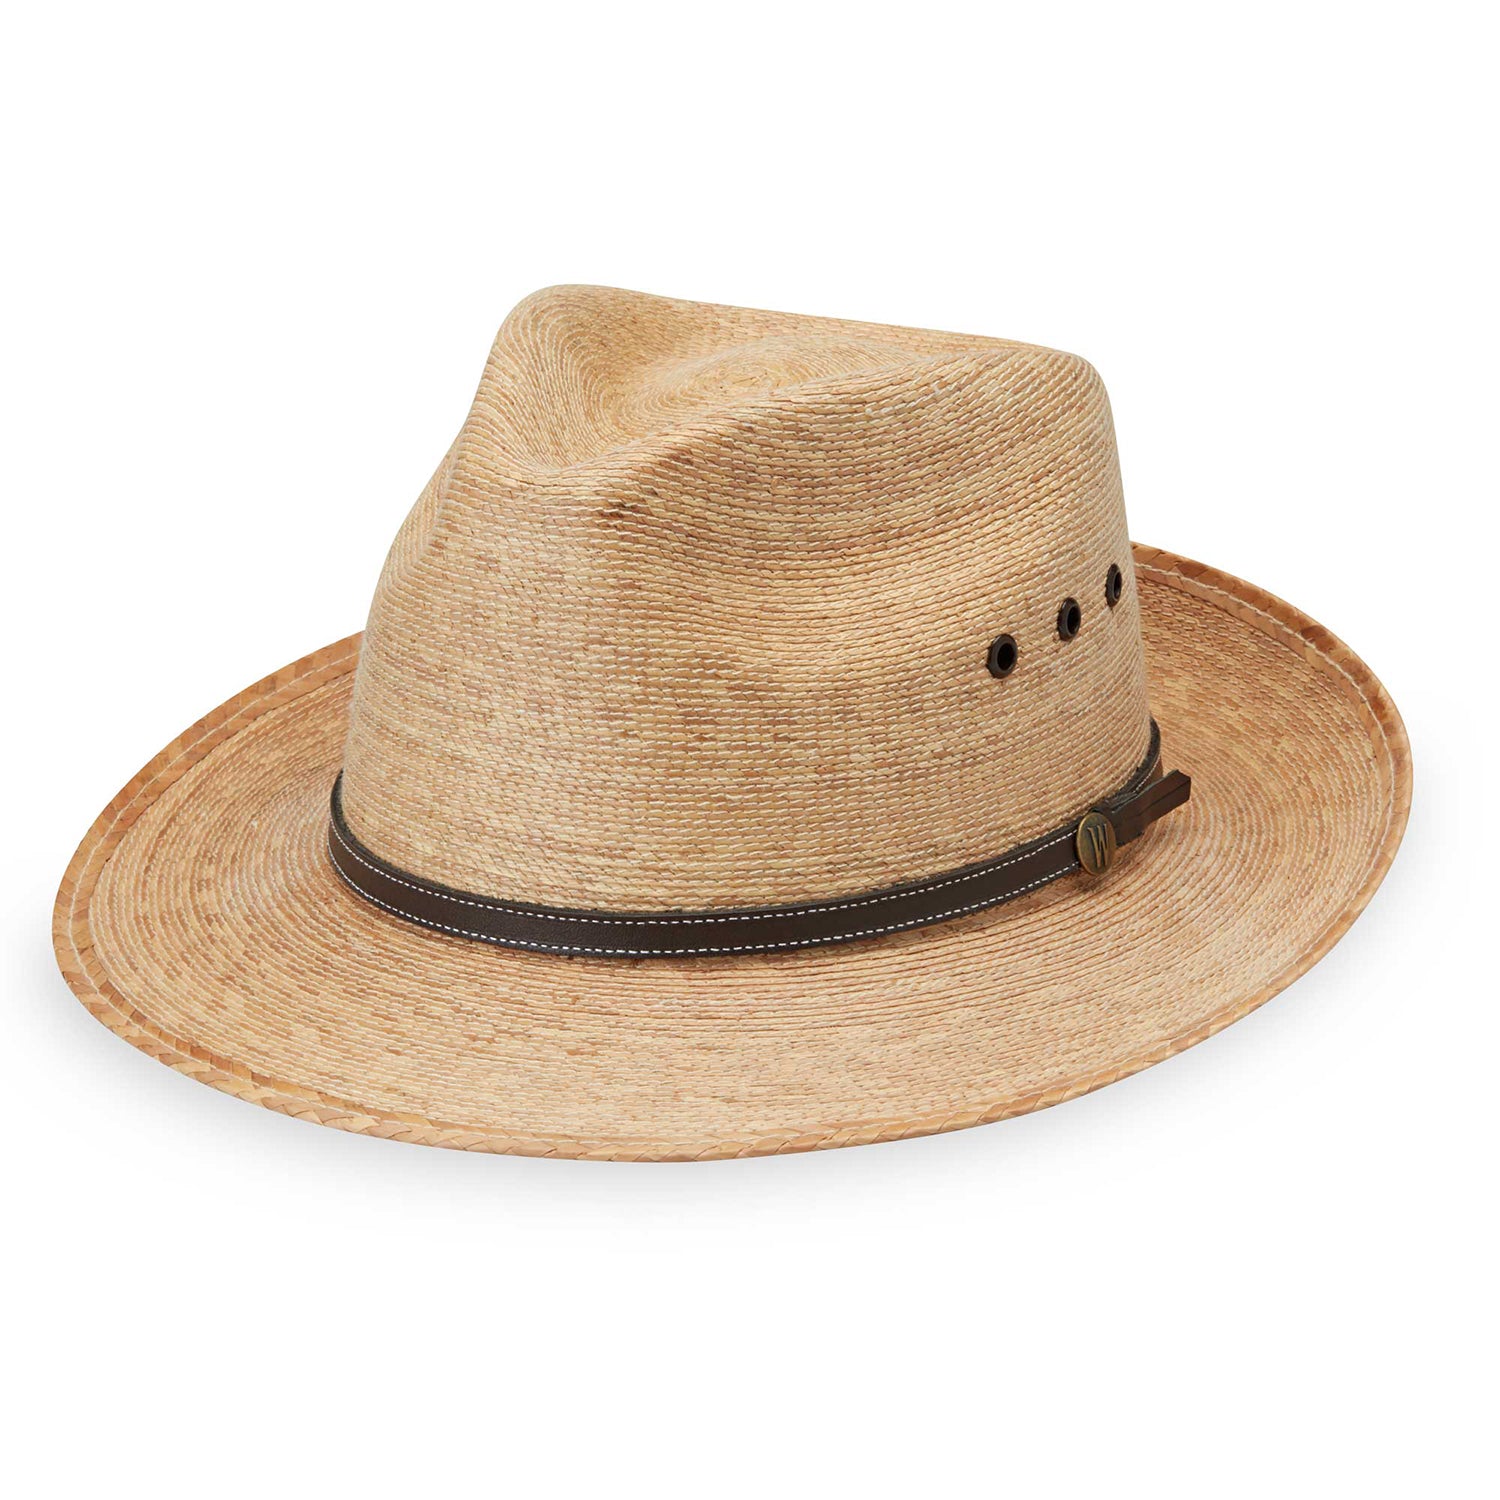 Featuring Fedora trilby Cortez artisan sun hat made with all-natural fiber by Wallaroo